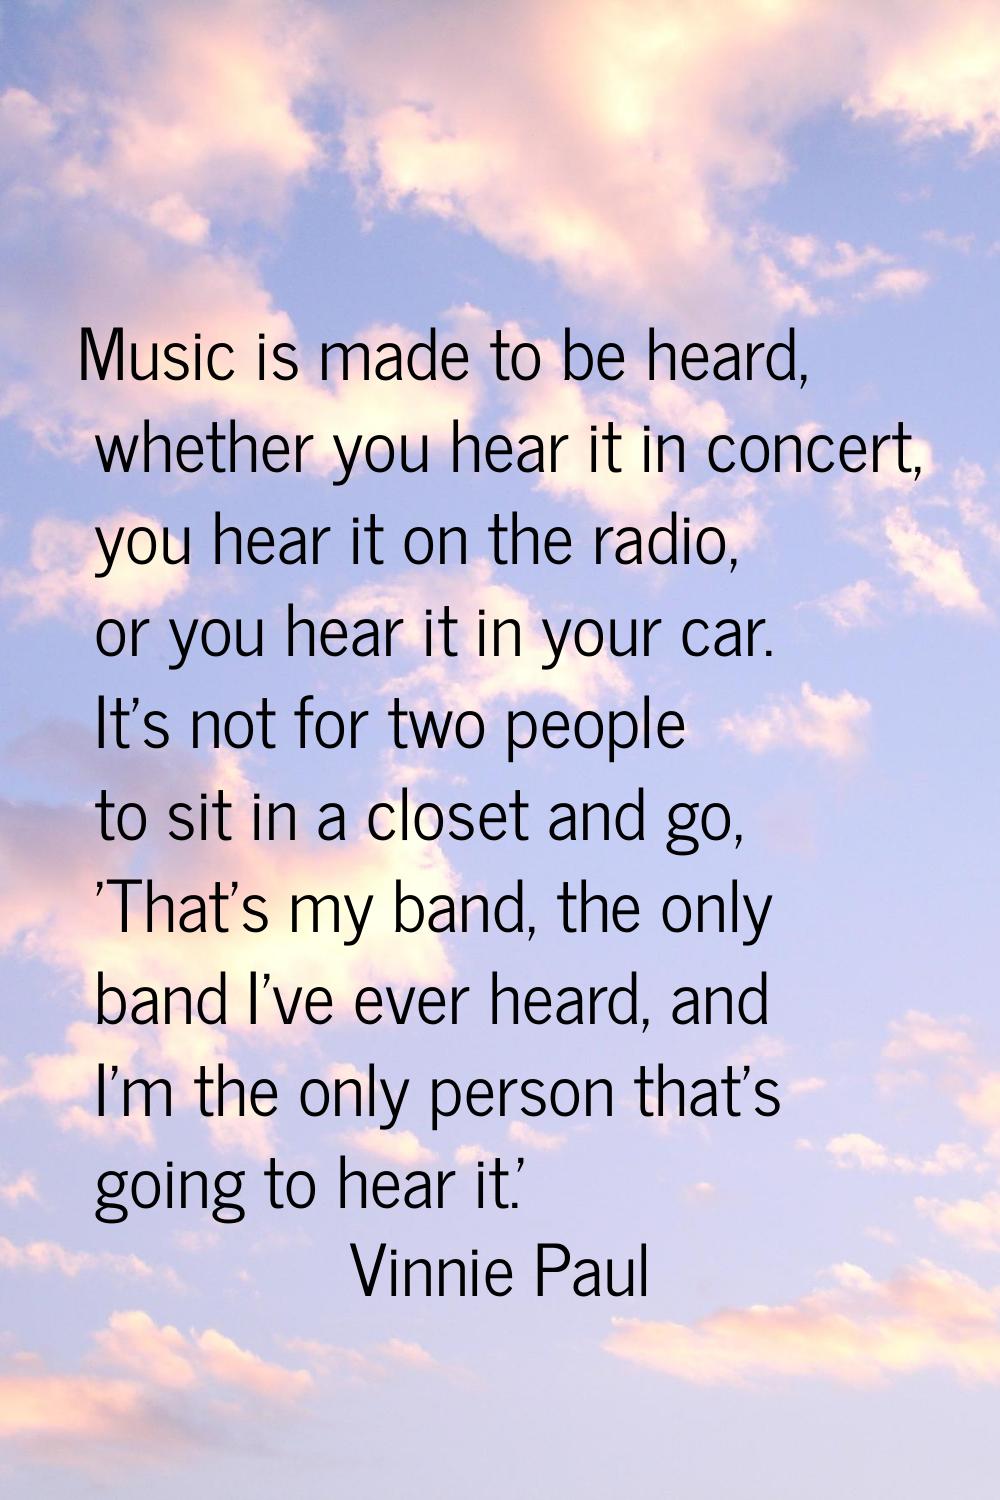 Music is made to be heard, whether you hear it in concert, you hear it on the radio, or you hear it